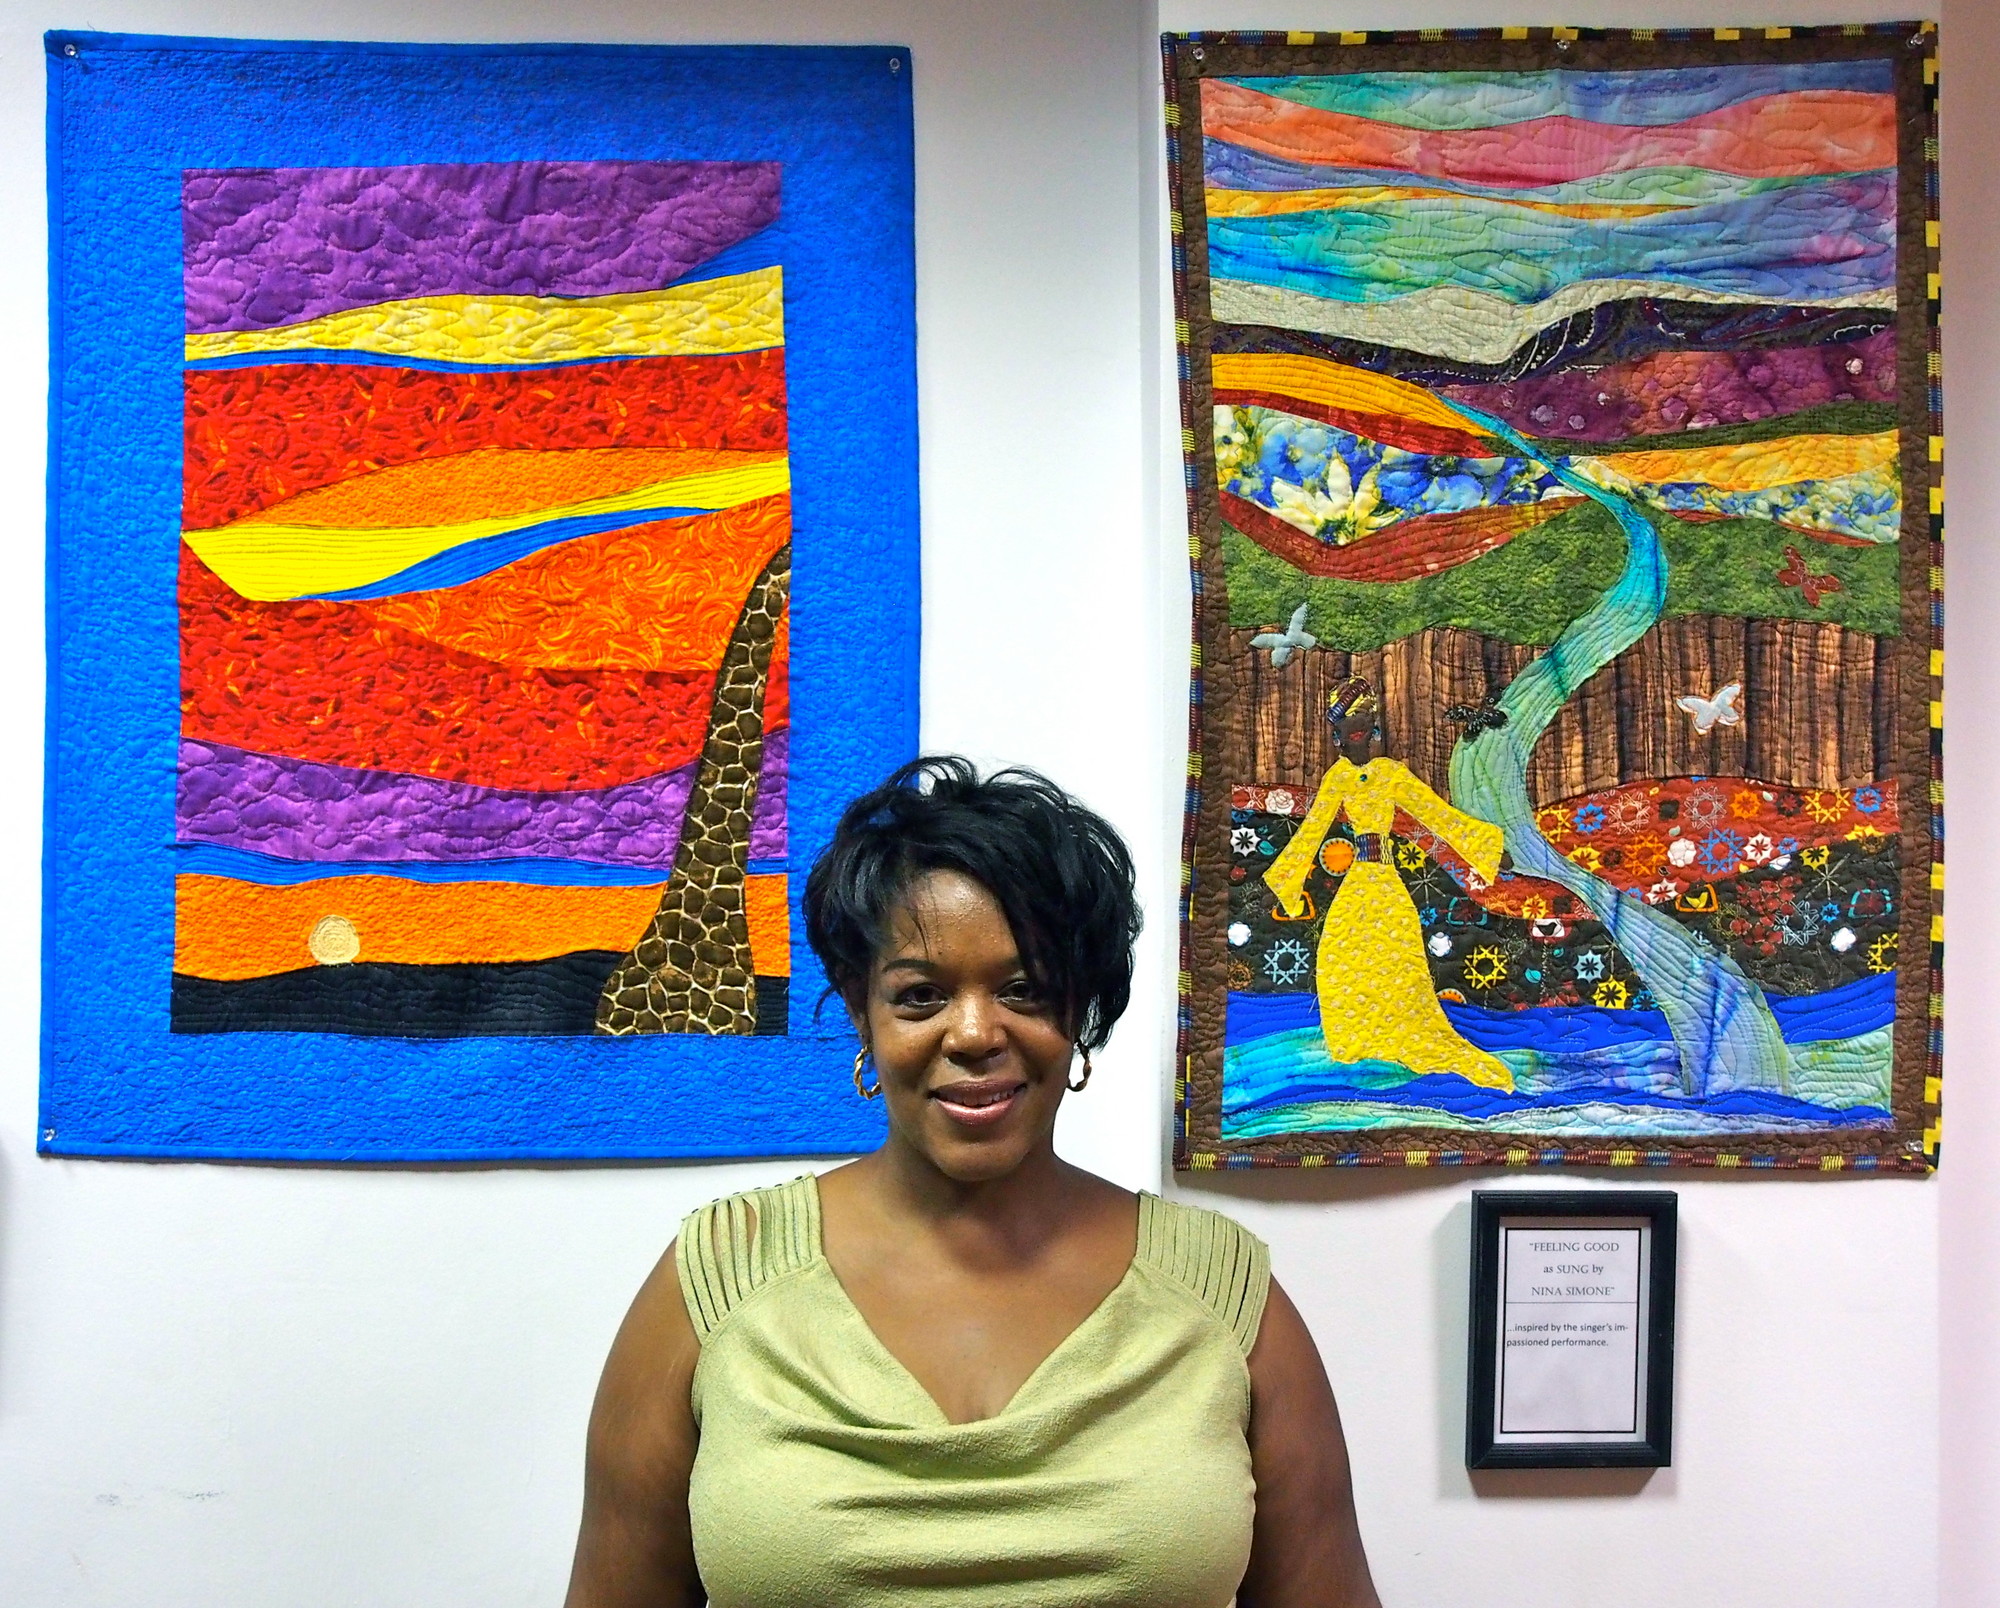 Kim Taylor, a quilting artist and former Baldwin Board of Education trustee, is 
displaying her work at the African American History Museum in Hempstead through the end of September. Her next show may be hosted by Hempstead Town Hall.